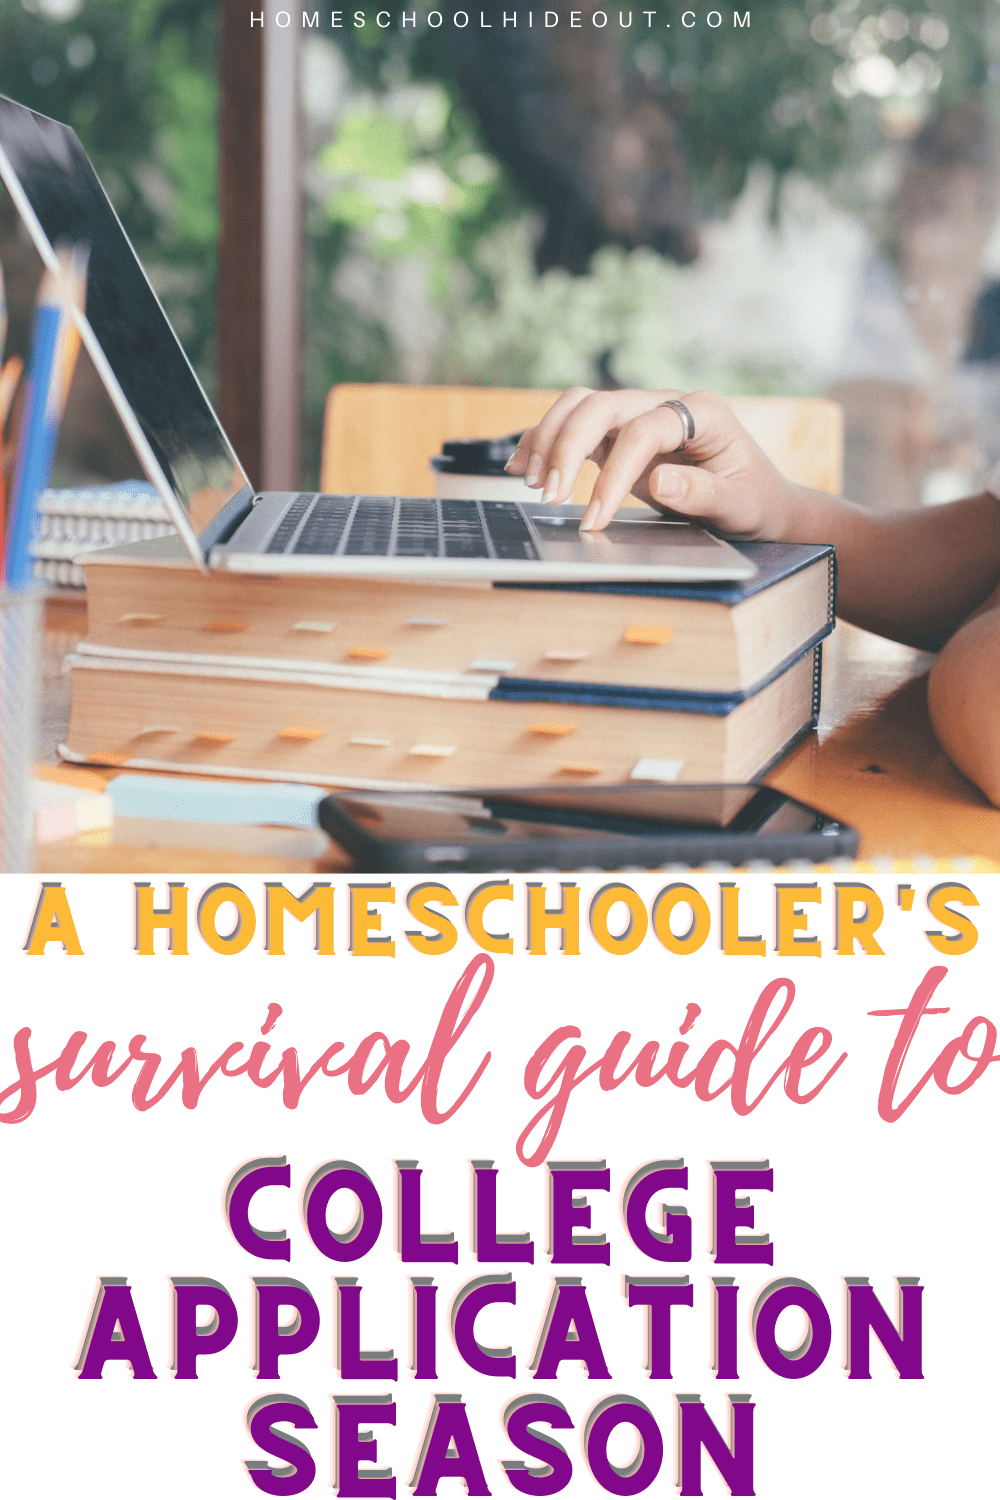 This guide has taken the struggle out of college applications for us!